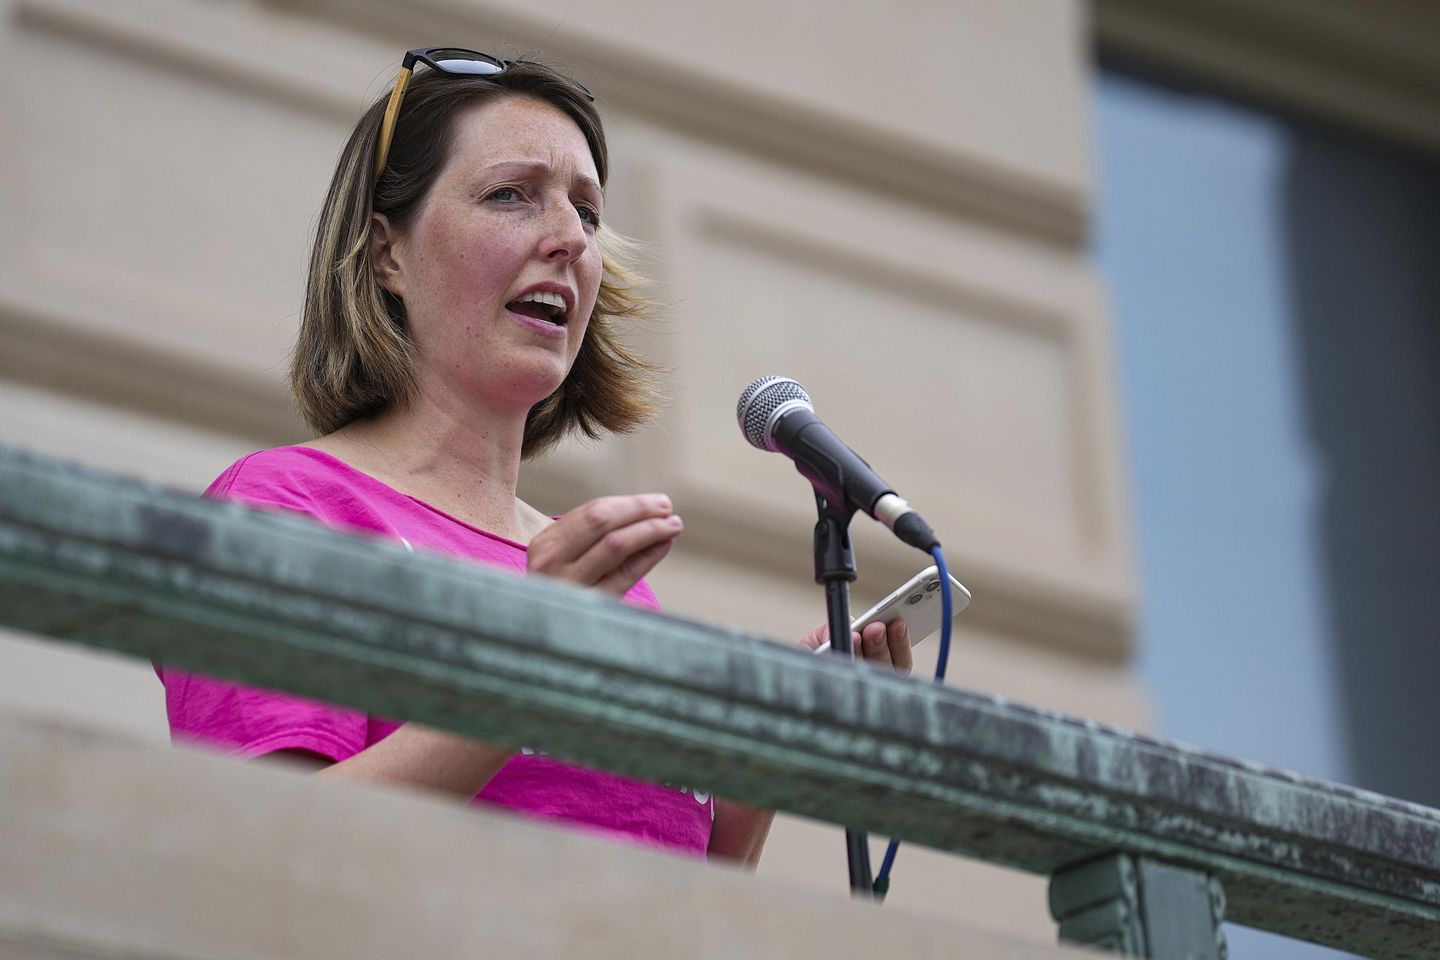 Dr. Caitlin Bernard, Indiana doctor, defends actions in 10-year-old's abortion